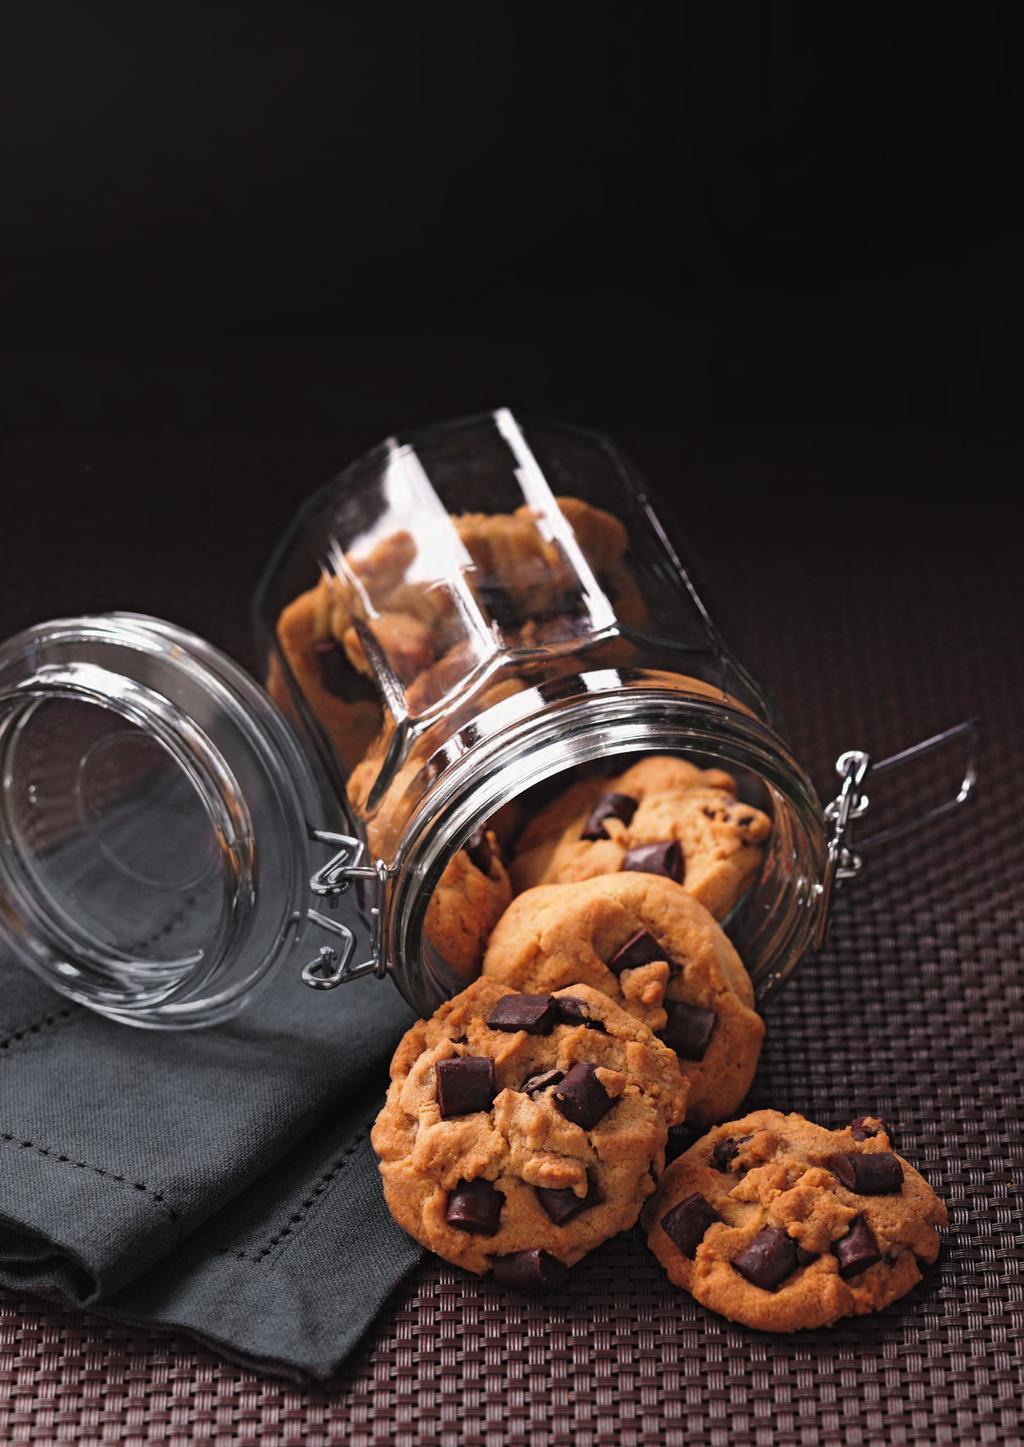 A BIG BITE FOR COOKIES & CO. Chocolate Chips with Maltit Chocolate Mini-Chips Chocolate Chunks XXL Milk Chocolate Chips Our chips and chunks are rich, compact and packed with chocolaty goodness.